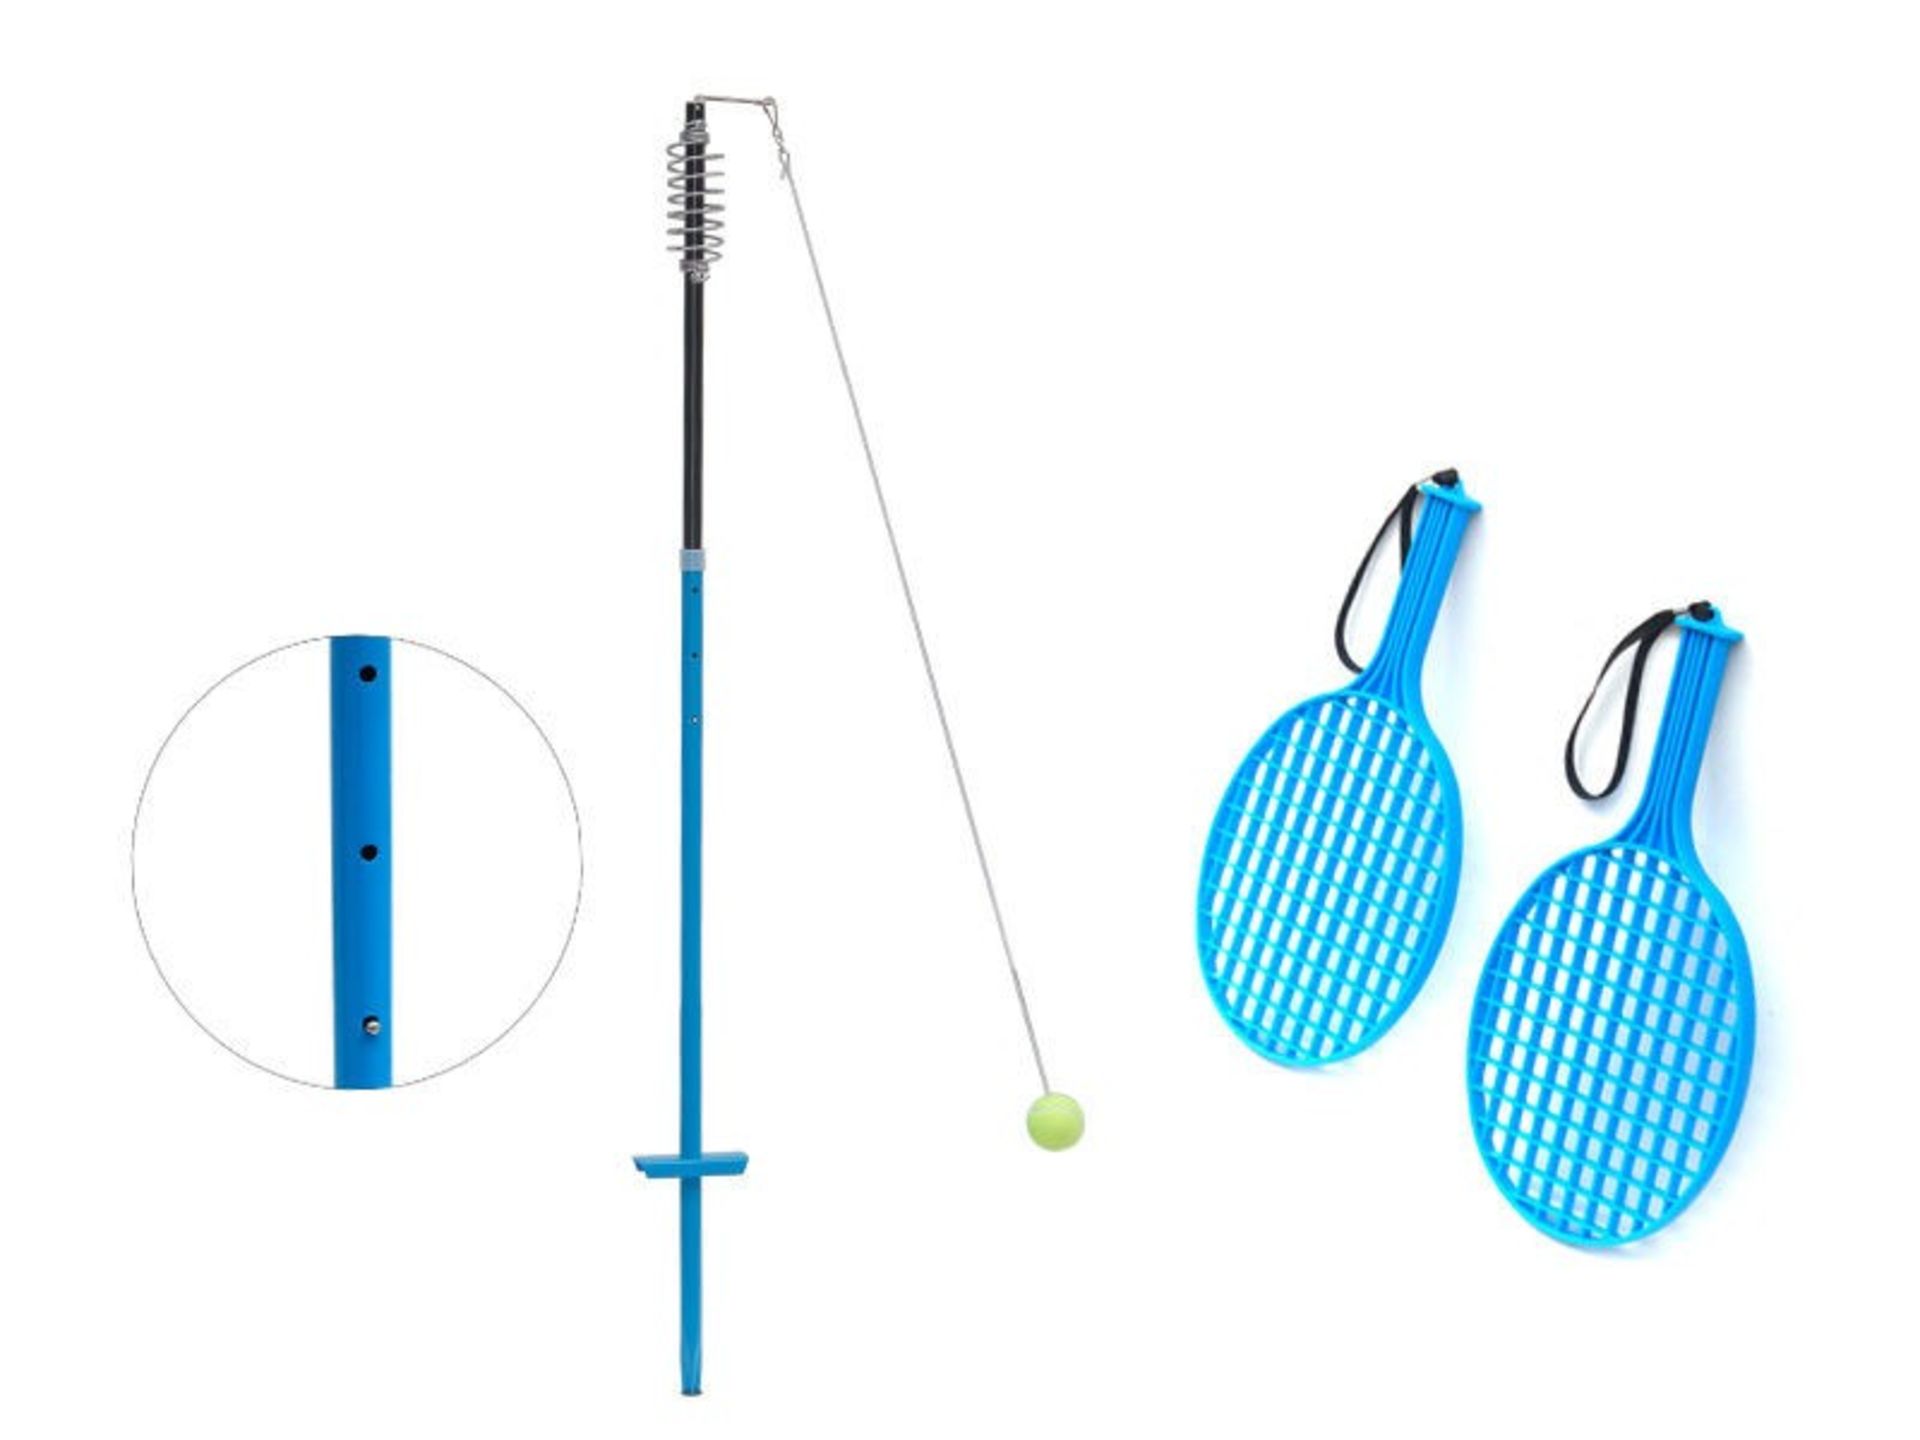 V *TRADE QTY* Brand New Tennis Trainer Set w/Ball and 2 bats in carry bag X 5 YOUR BID PRICE TO BE